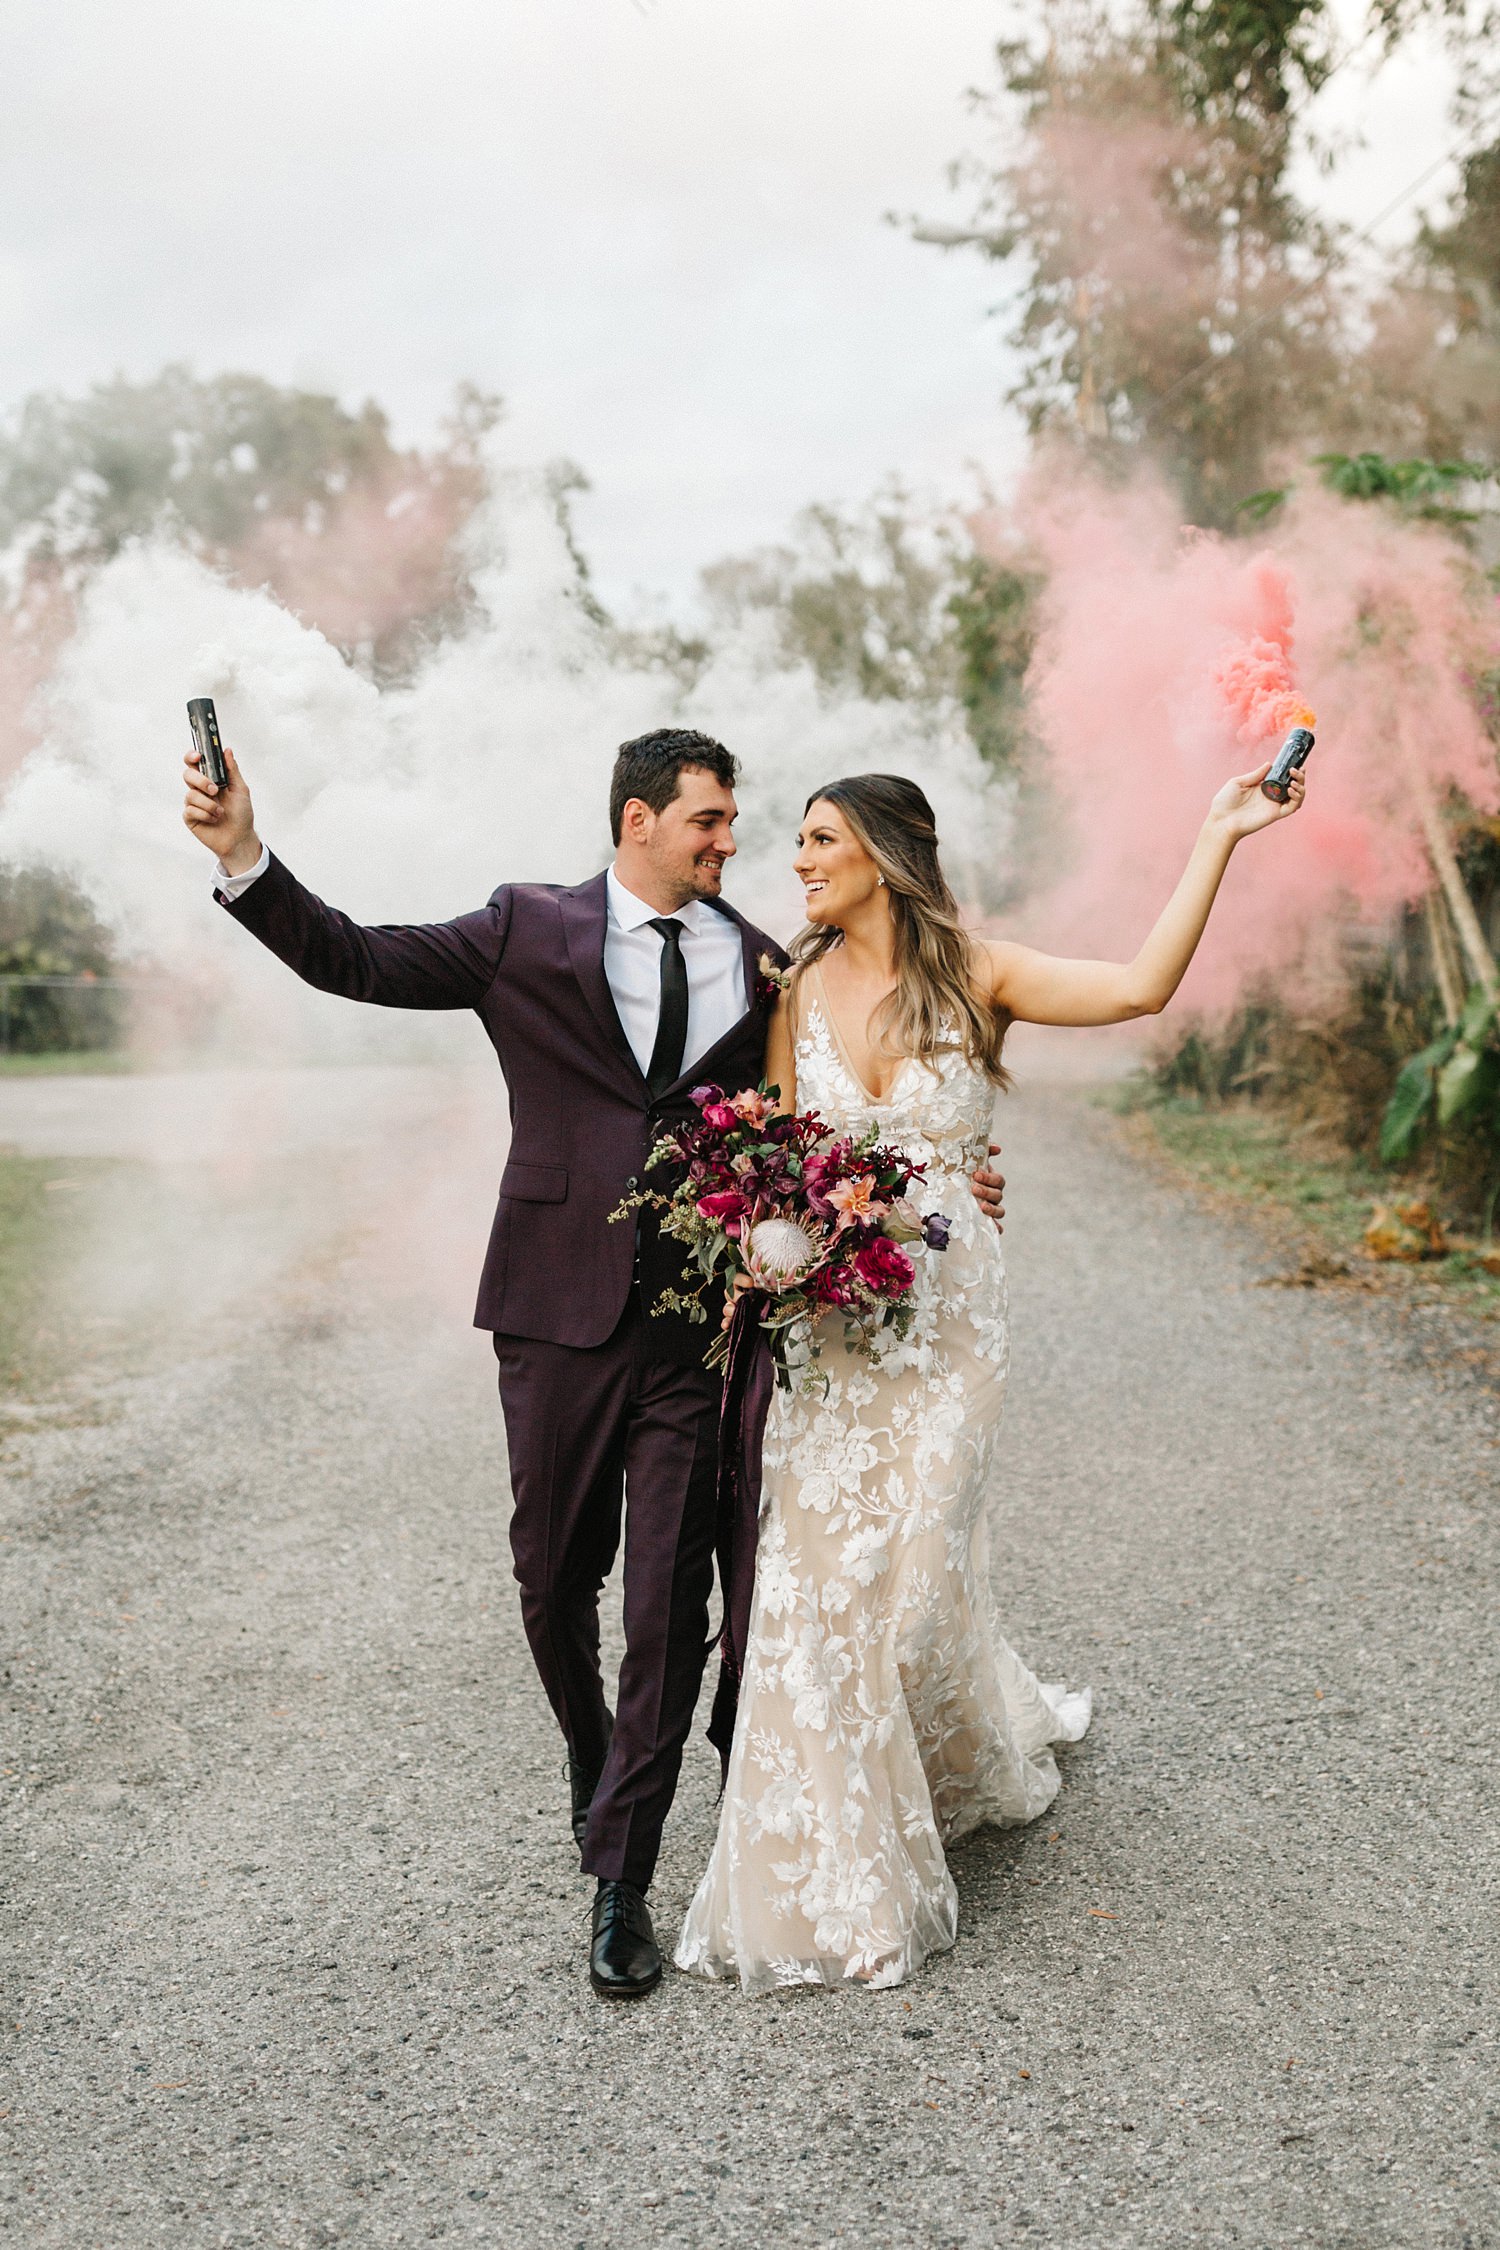 Orlando wedding photography with smokebombs for a boho outdoor wedding at The Acre